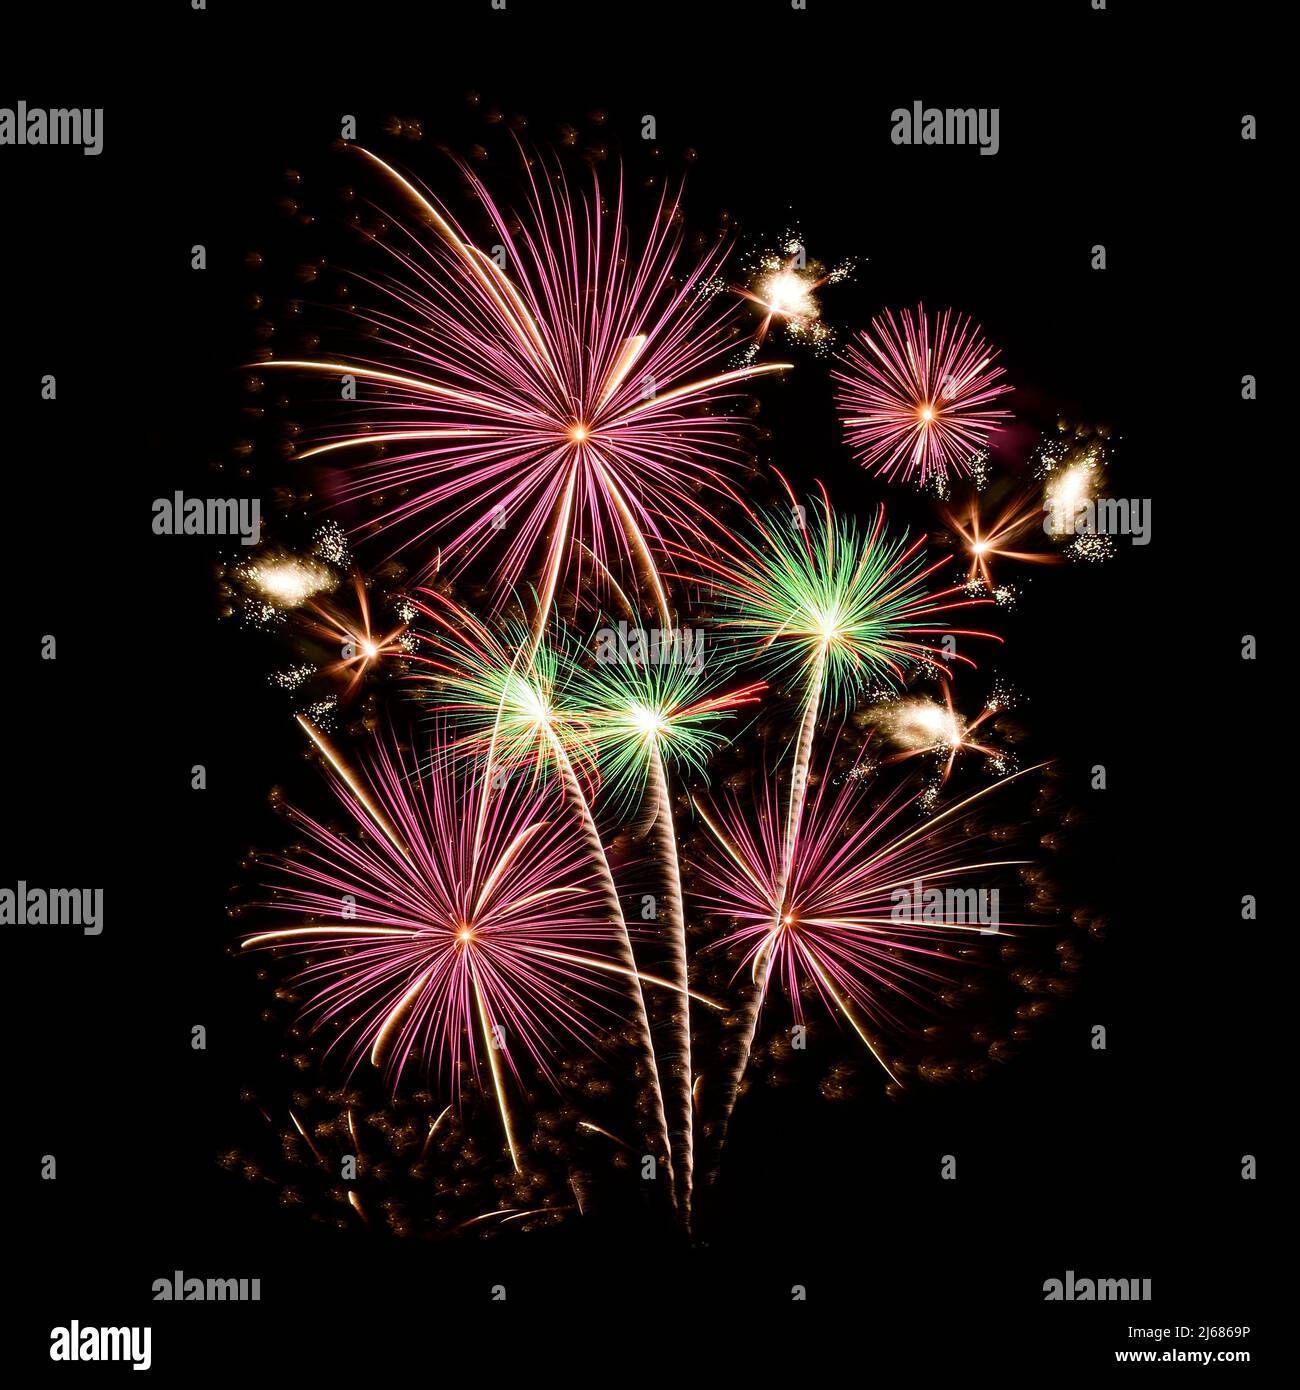 Firework bouquet isolated on black background for decoration on any images and websites. Stock Photo